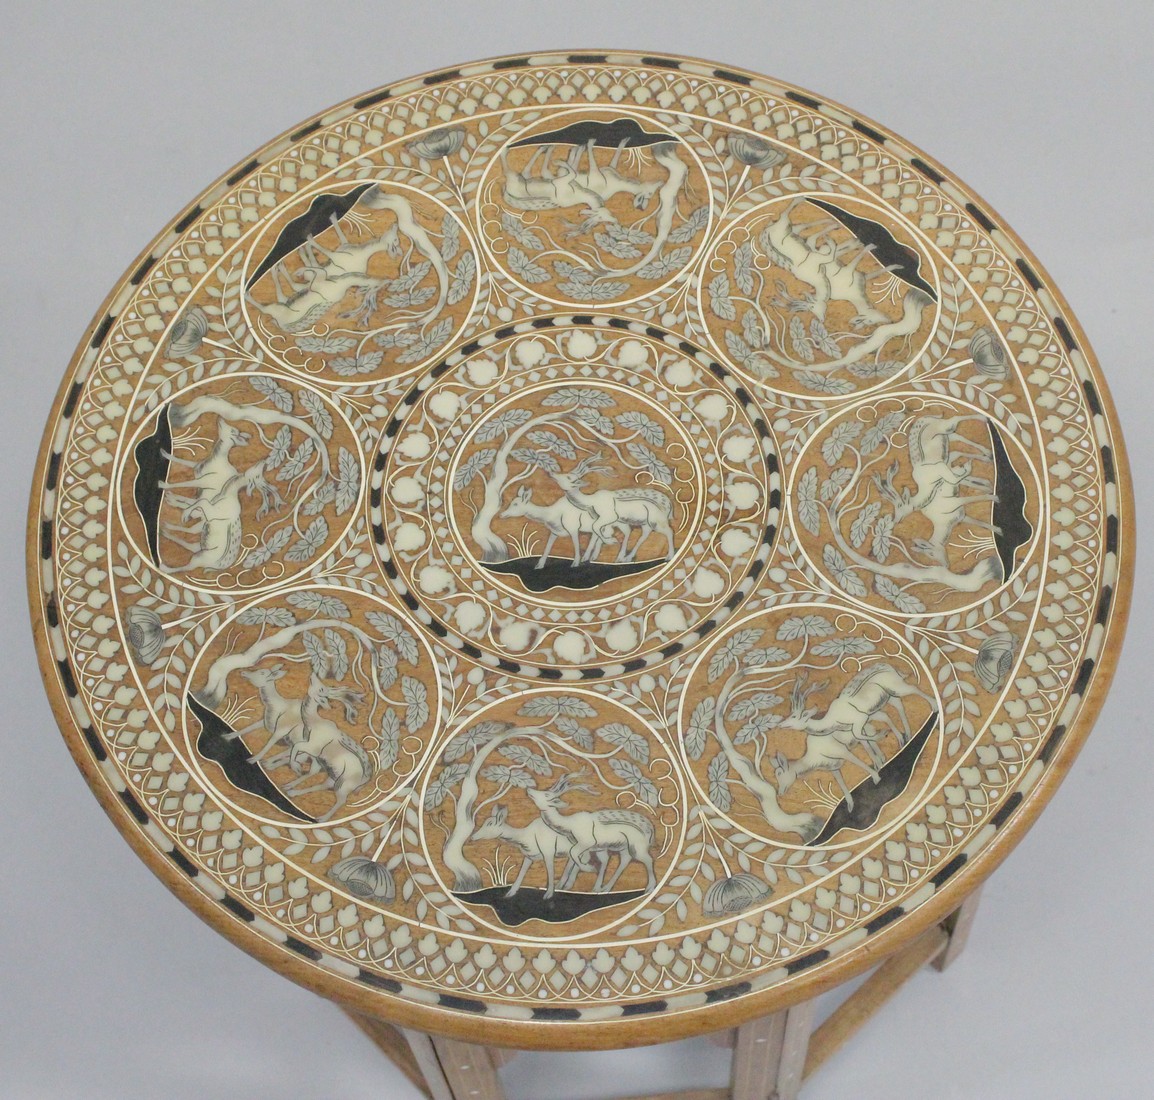 A GOOD AND UNUSUAL INDIAN BONE INLAID CIRCULAR HARDWOOD TABLE, with folding base, the top inlaid - Image 2 of 4